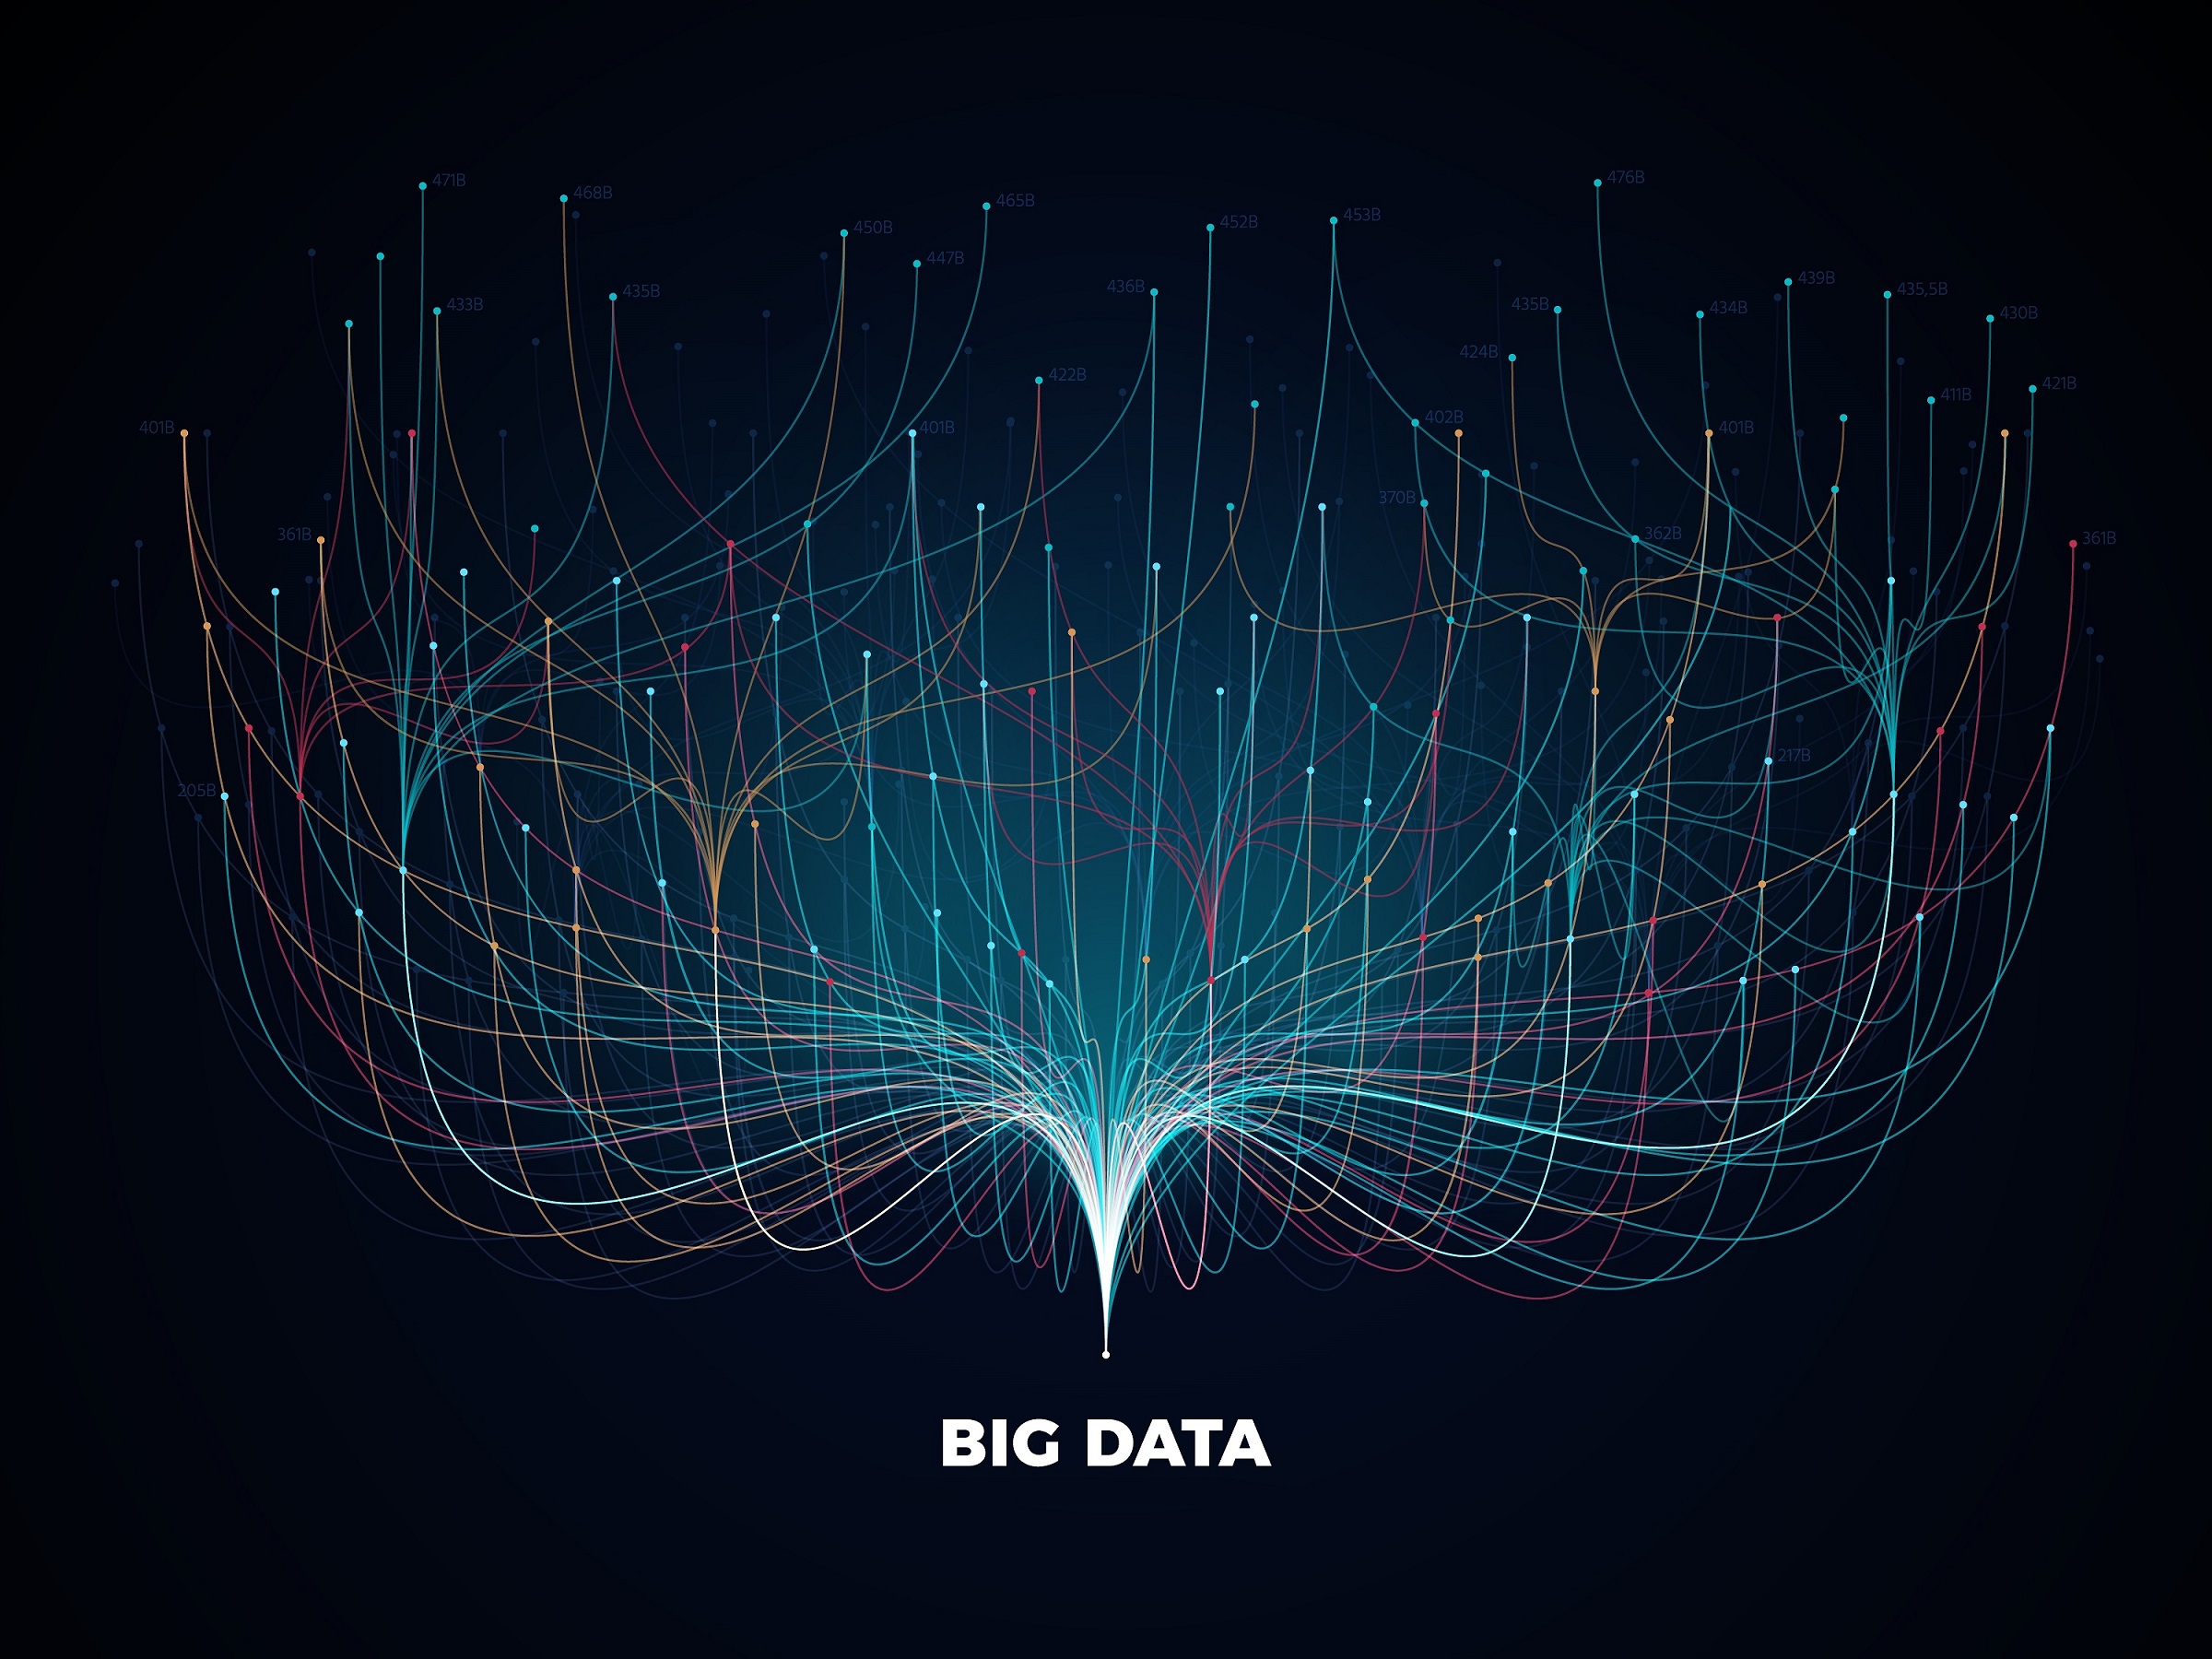 Big data network visualization concept. Digital music industry, abstract science vector background